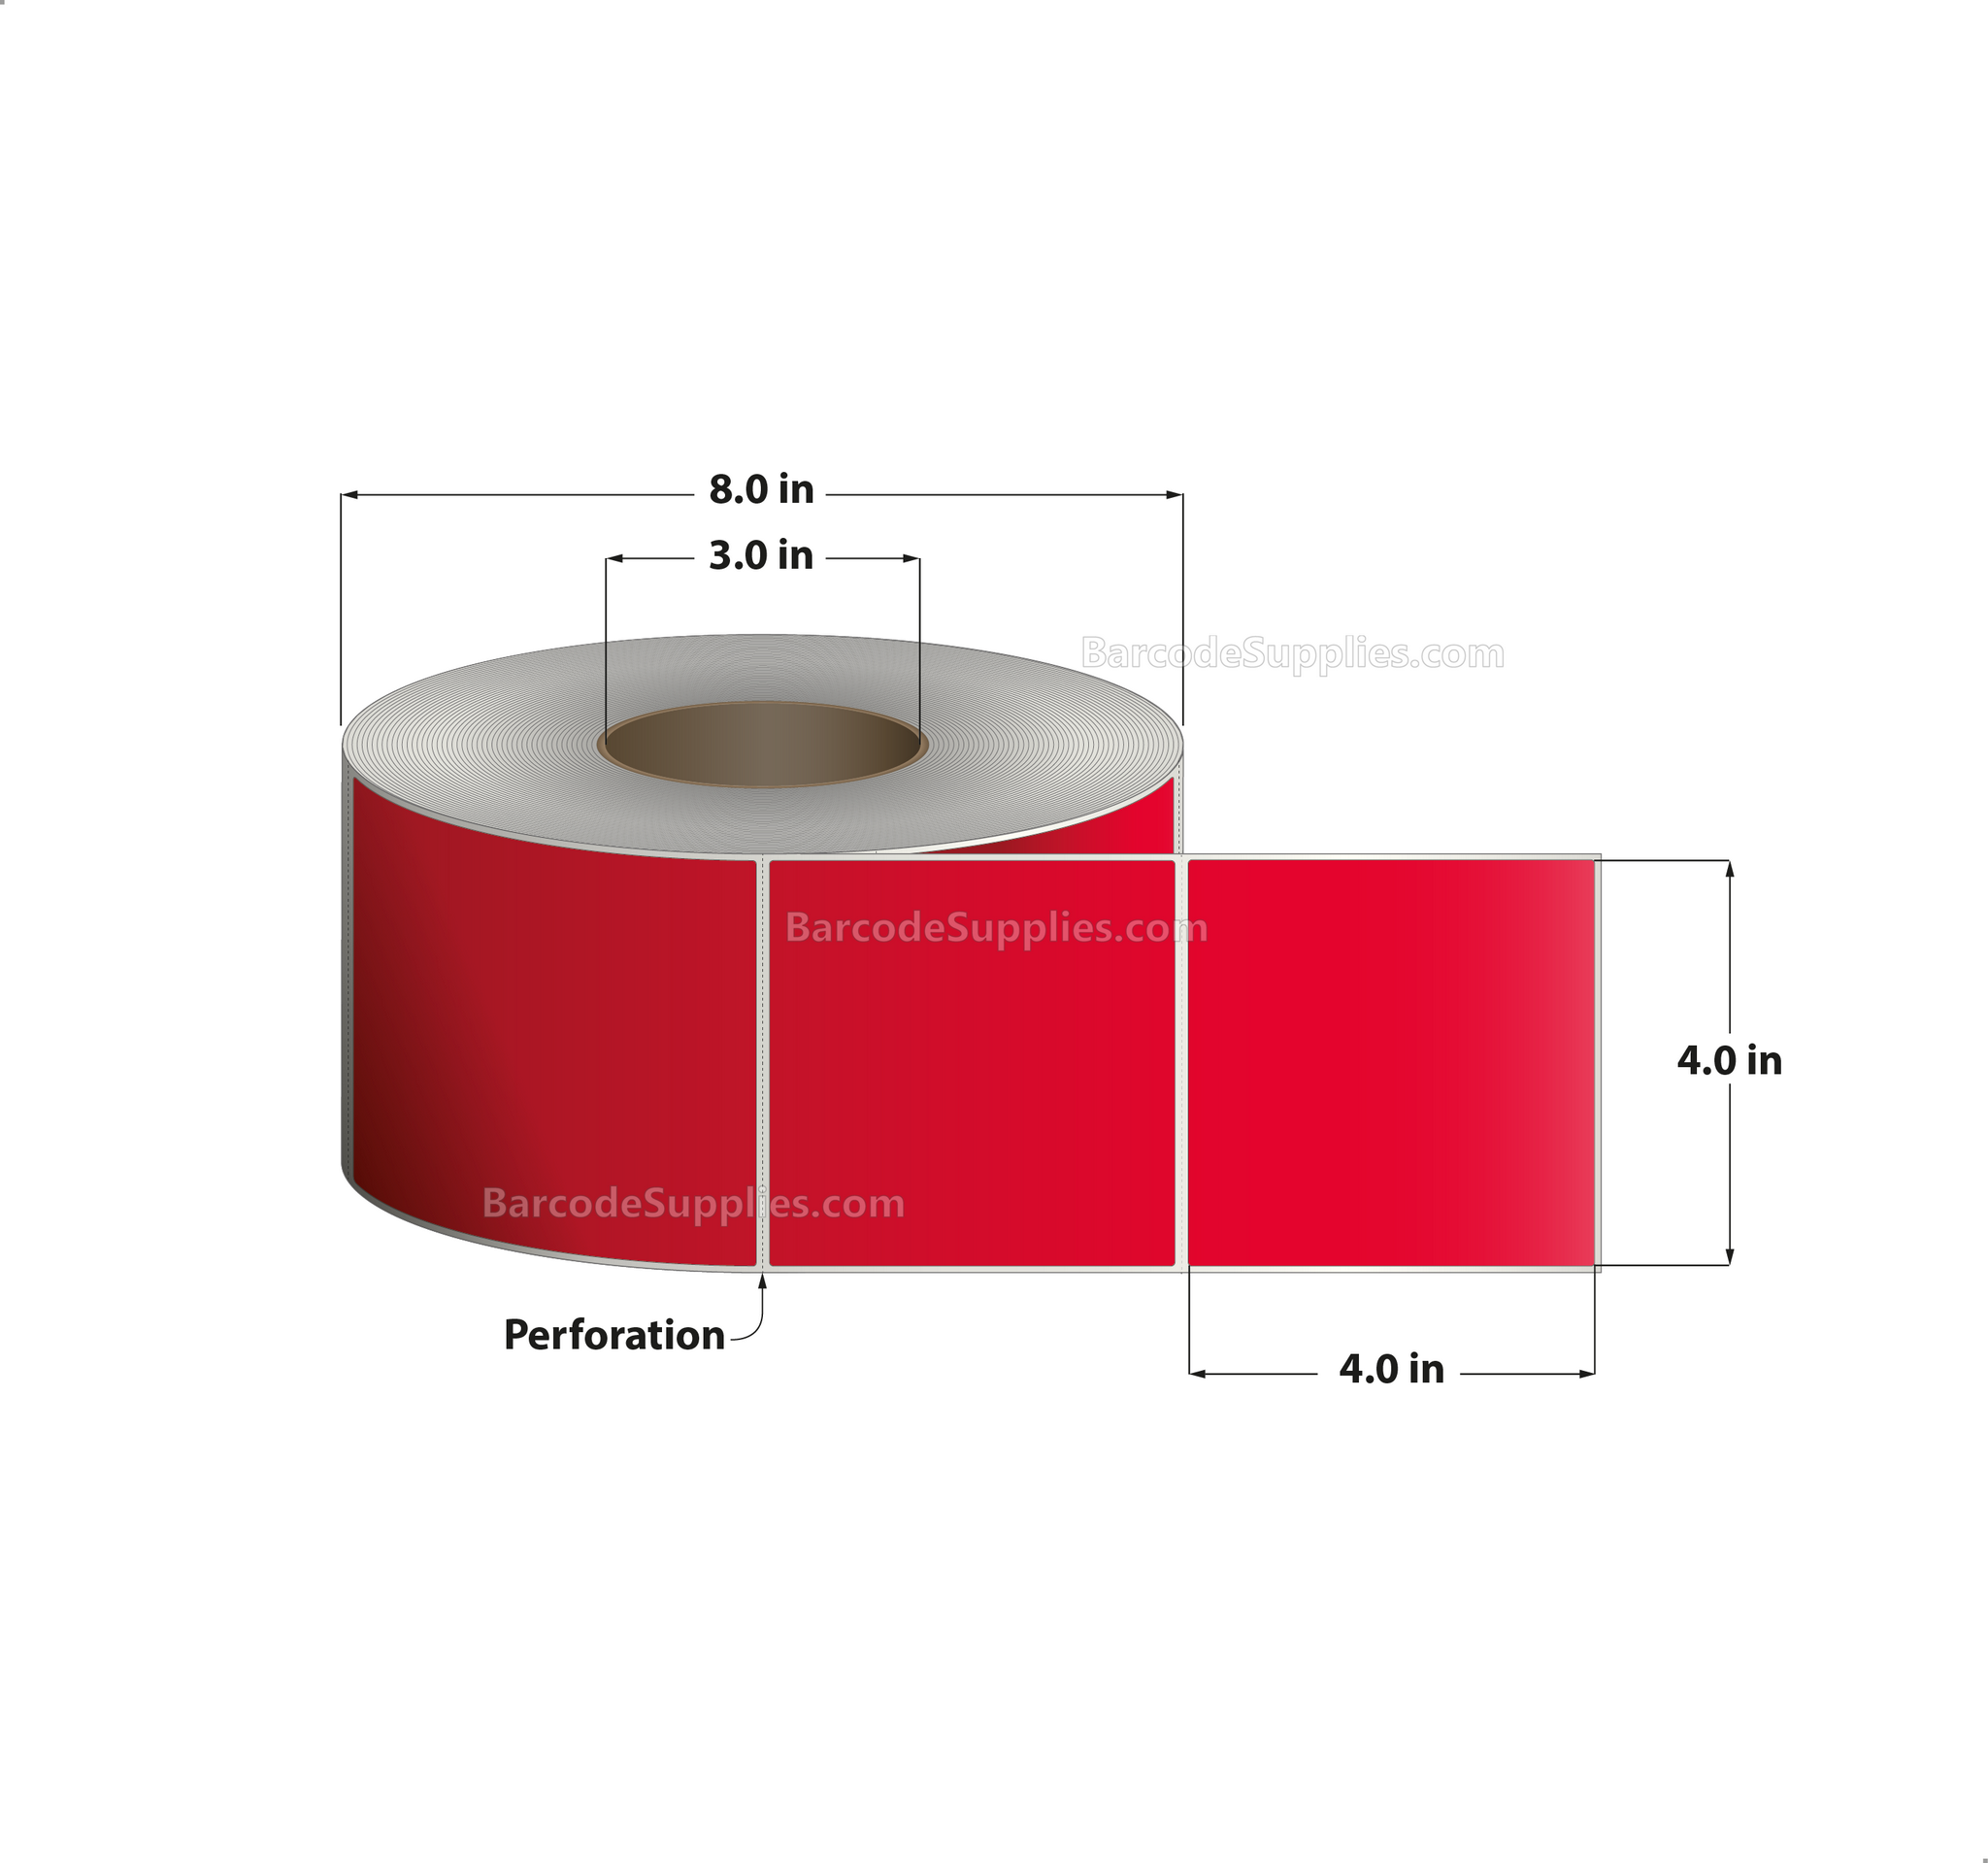 4 x 4 Thermal Transfer 032 Red Labels With Permanent Adhesive - Perforated - 1500 Labels Per Roll - Carton Of 4 Rolls - 6000 Labels Total - MPN: RFC-4-4-1500-RD